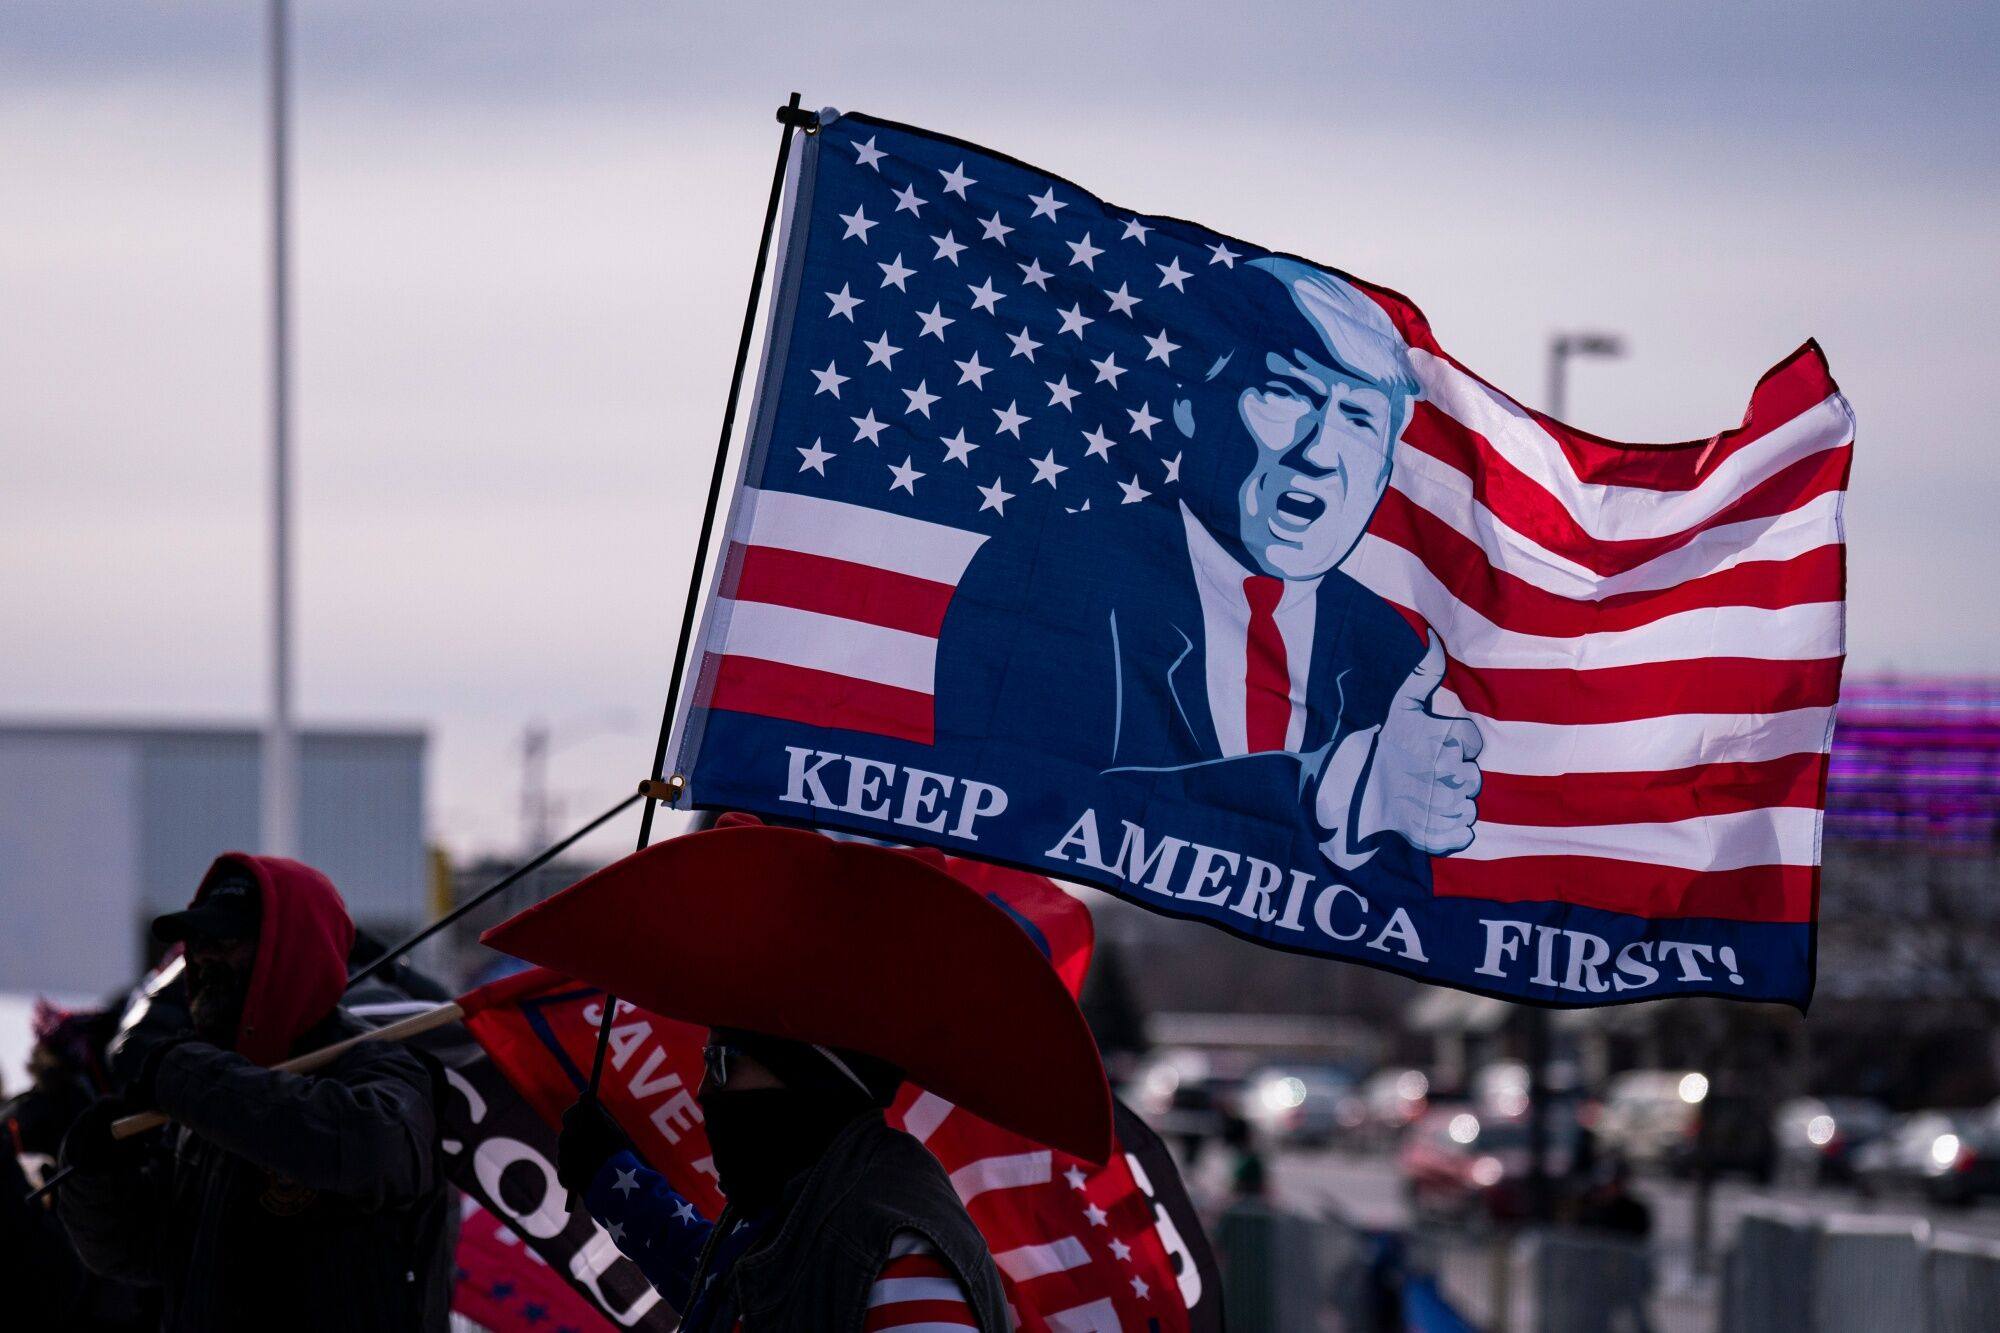 An attendee flies a flag supporting former US president Donald Trump ahead of a campaign event in Manchester, New Hampshire, on January 20. Trump’s pledge to expand his use of tariffs should he return to office has sparked concern among US businesses and allies. Photo: Bloomberg